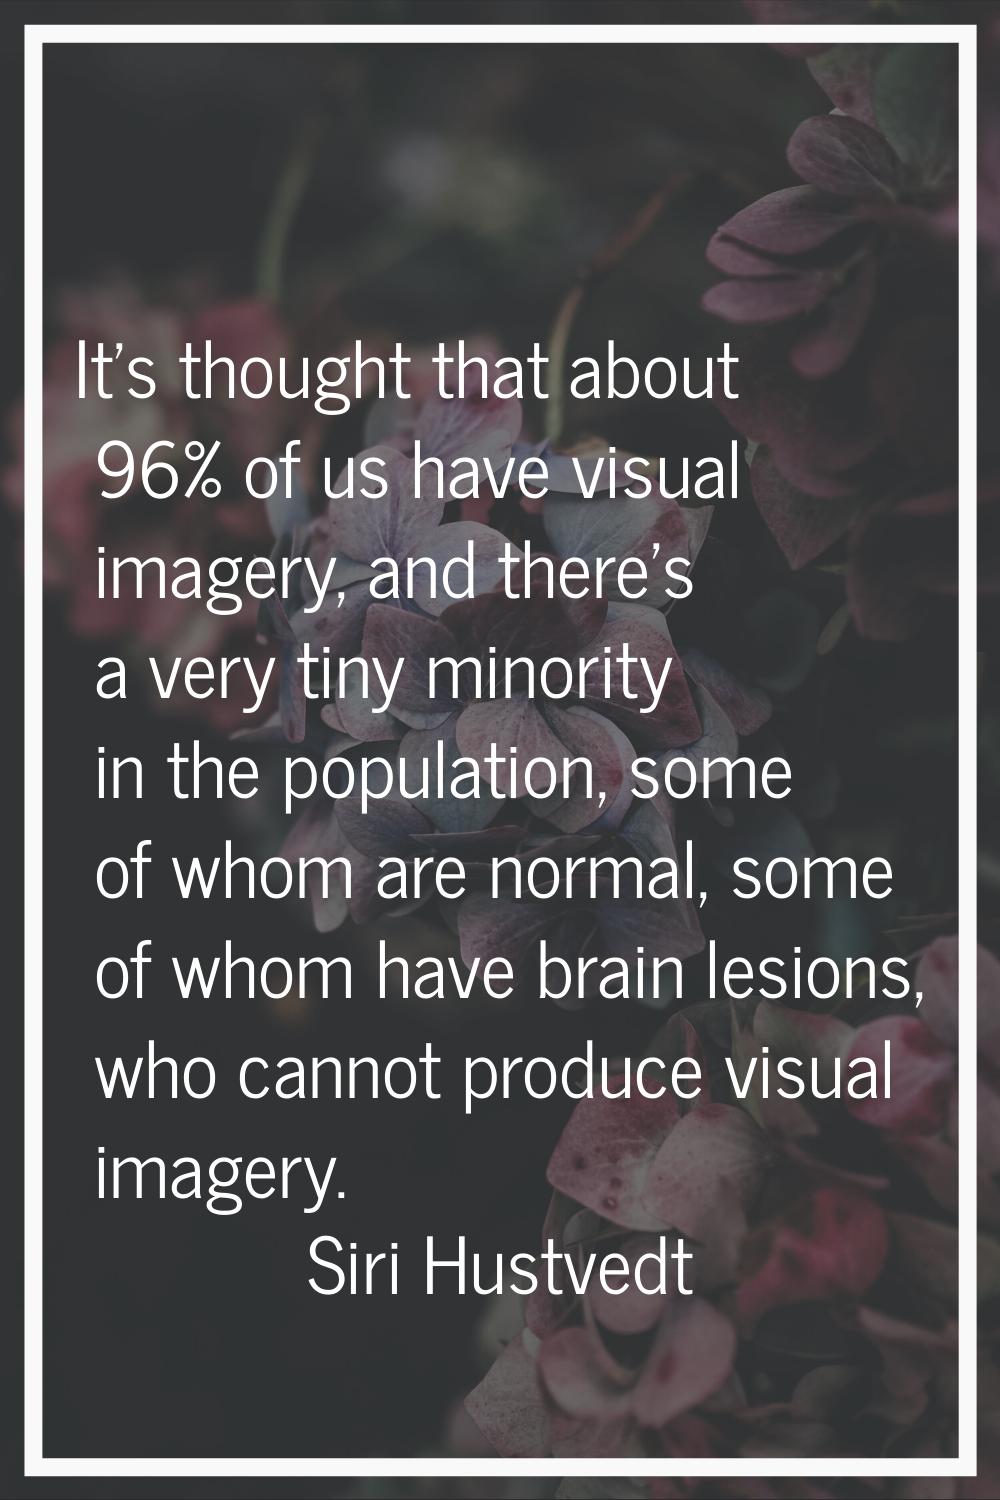 It's thought that about 96% of us have visual imagery, and there's a very tiny minority in the popu